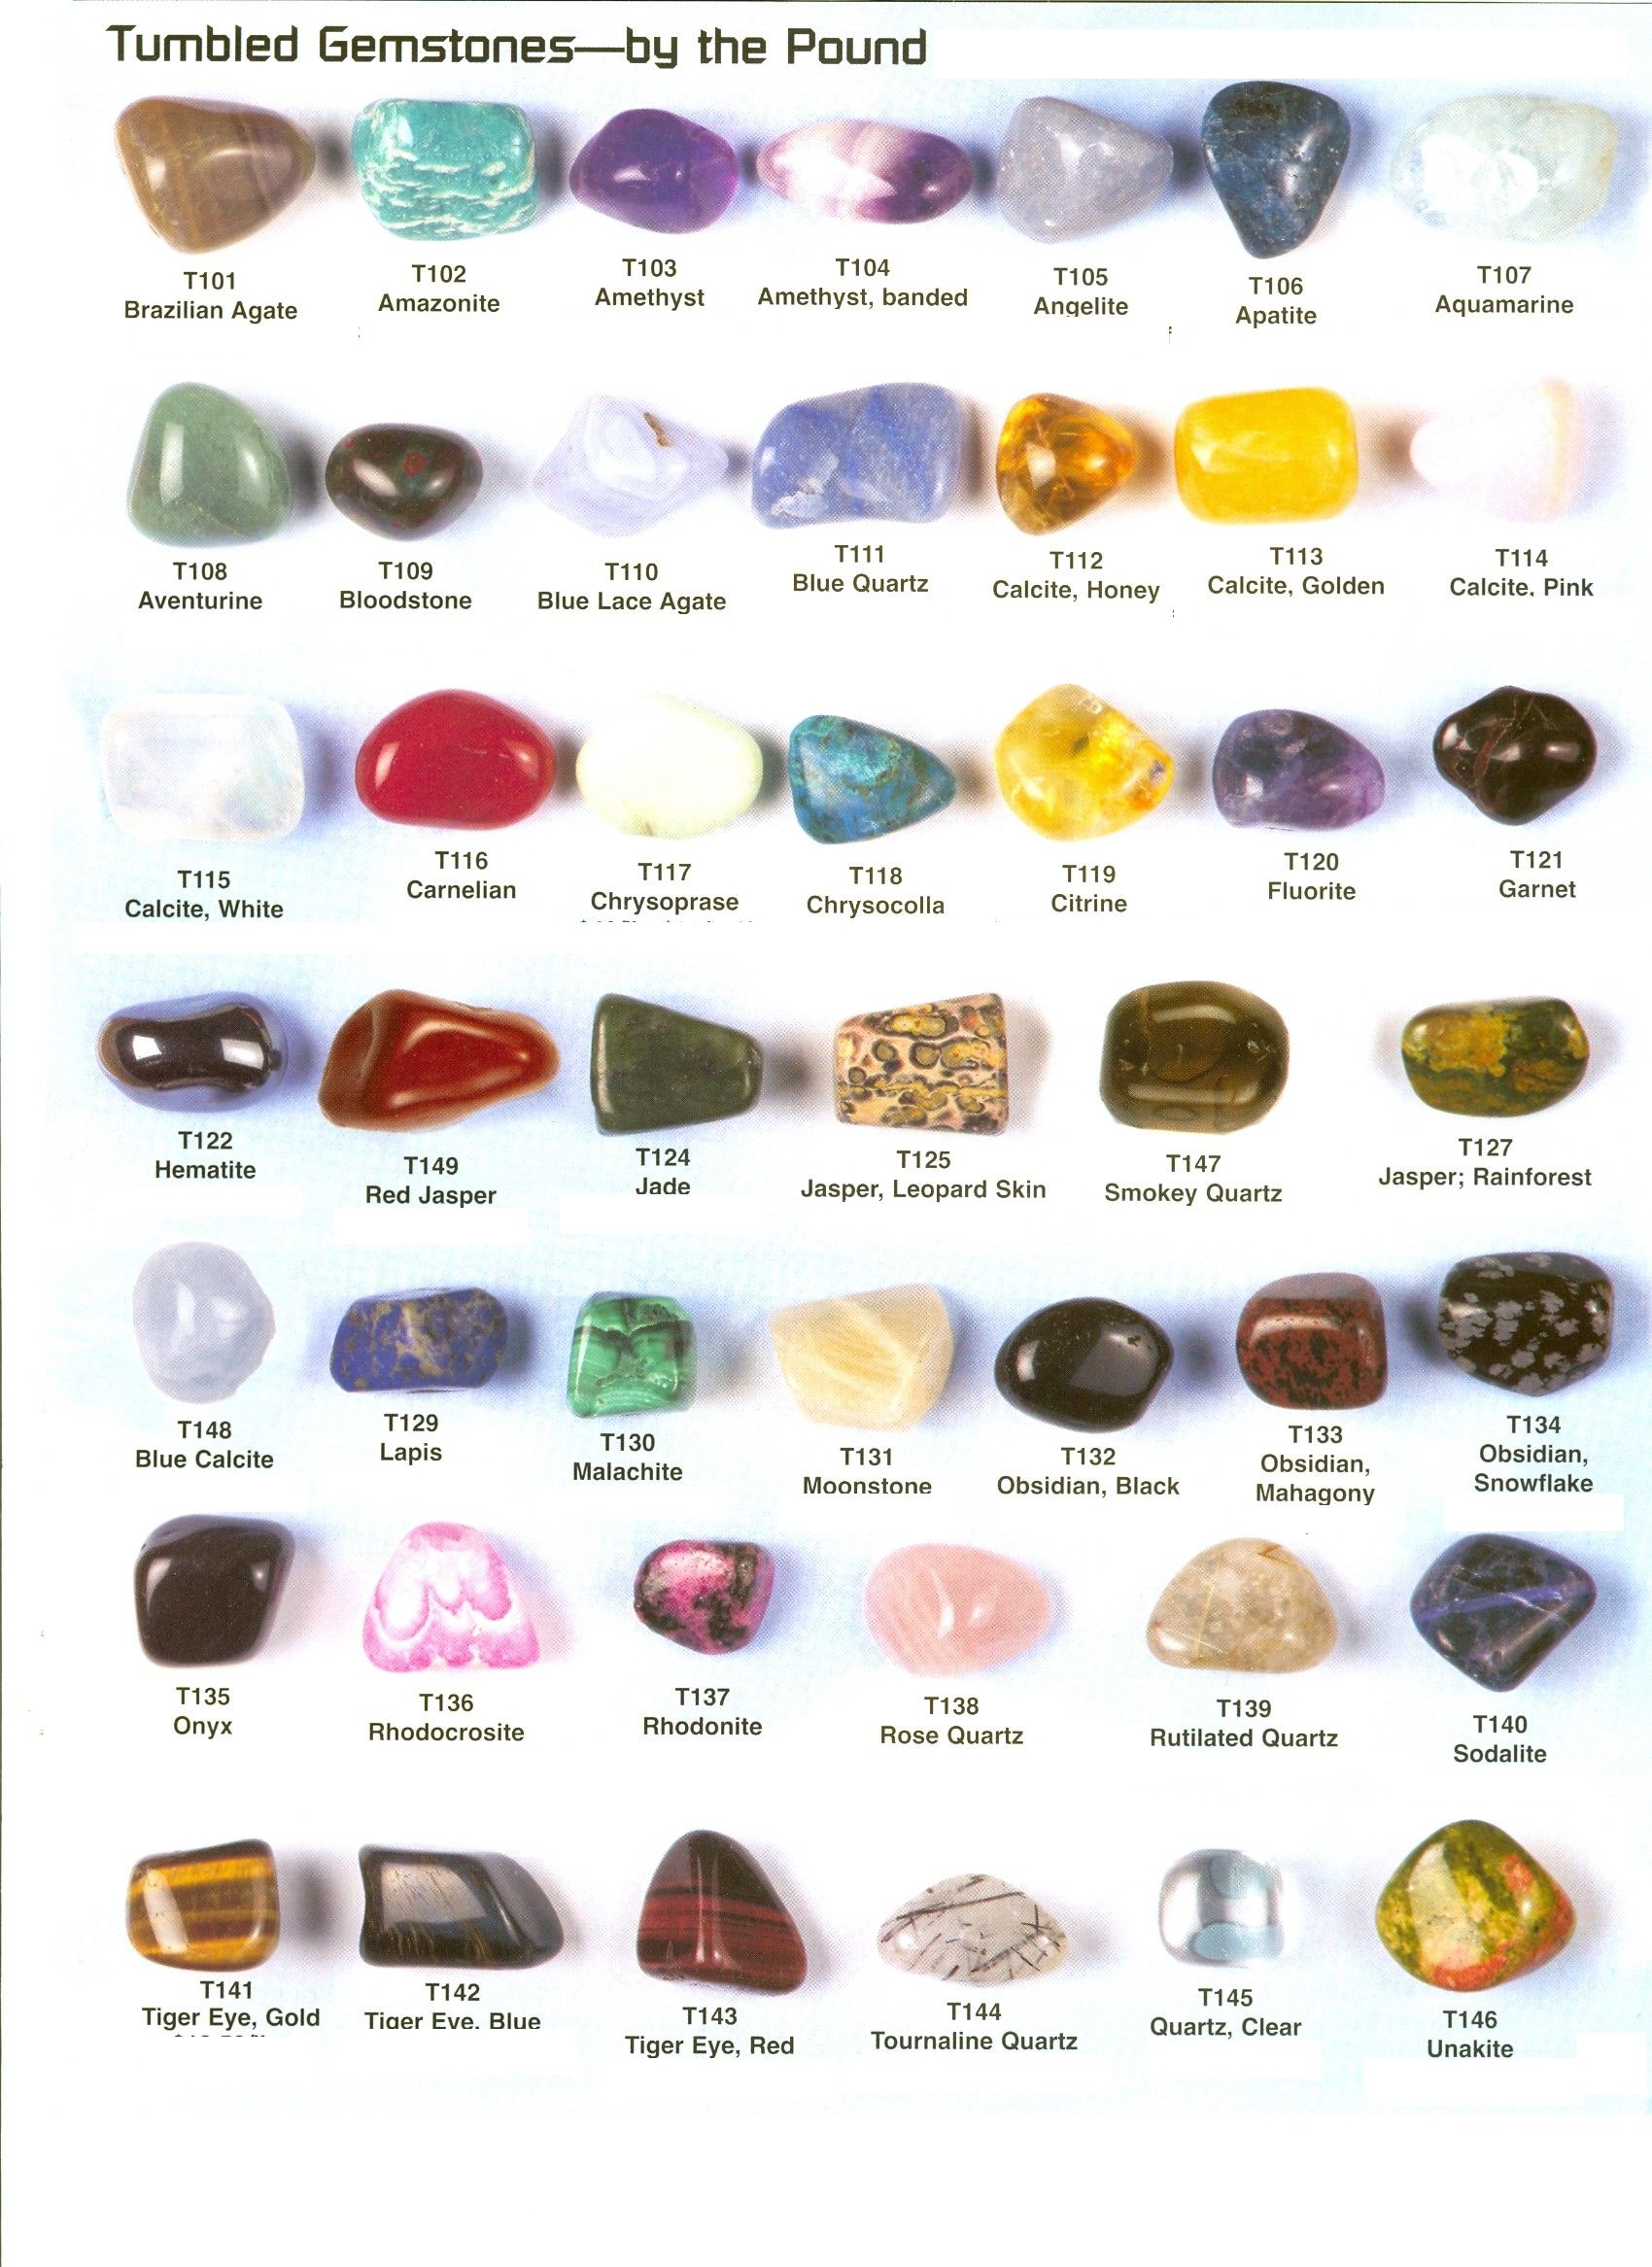 Tumbled and Polished Stones and Crystals - Great images of different ...